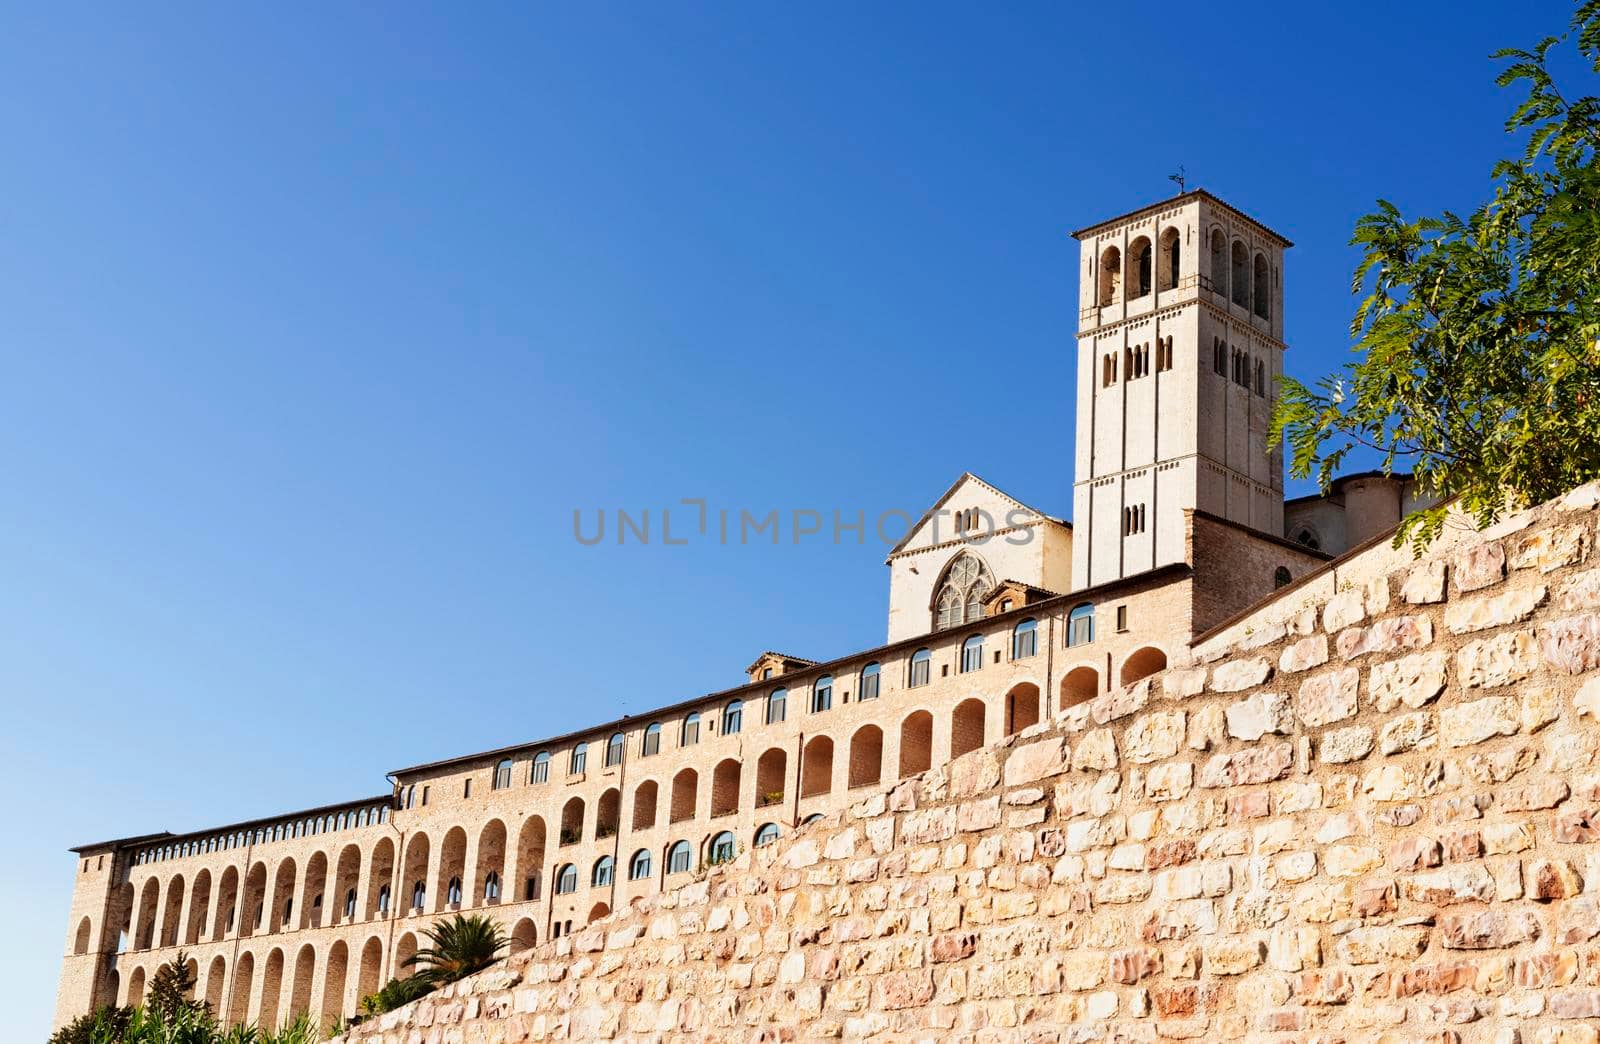 Sacro Convento friary in Assisi by victimewalker